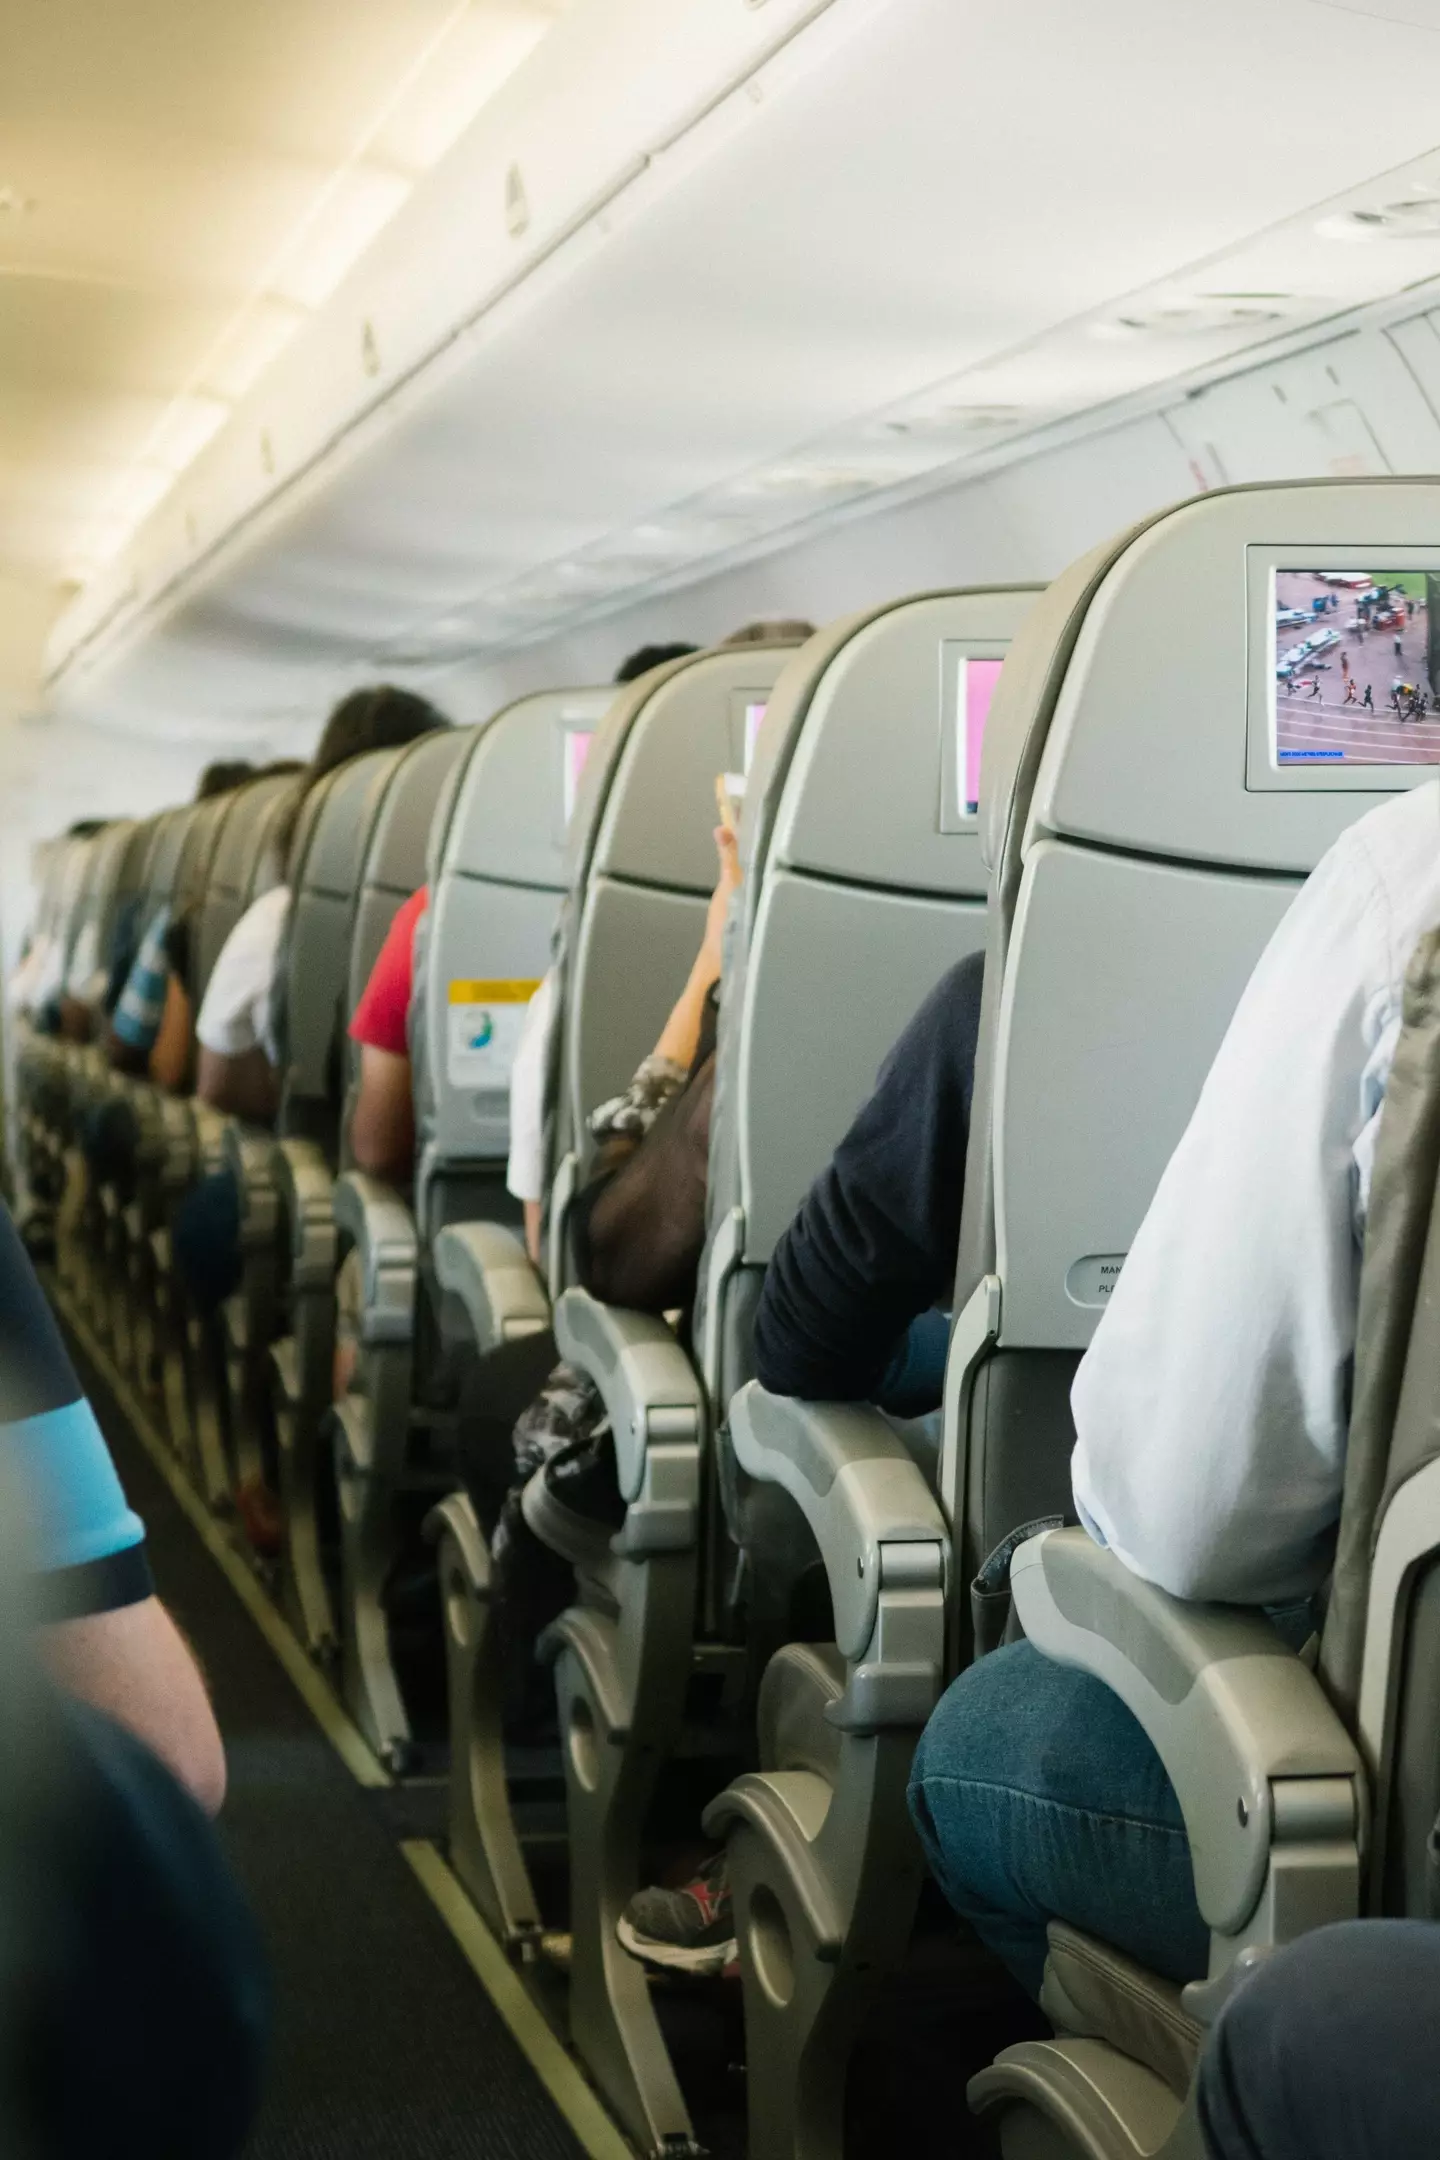 Seating arrangements on planes are a contentious issue which never fails to divide the internet.